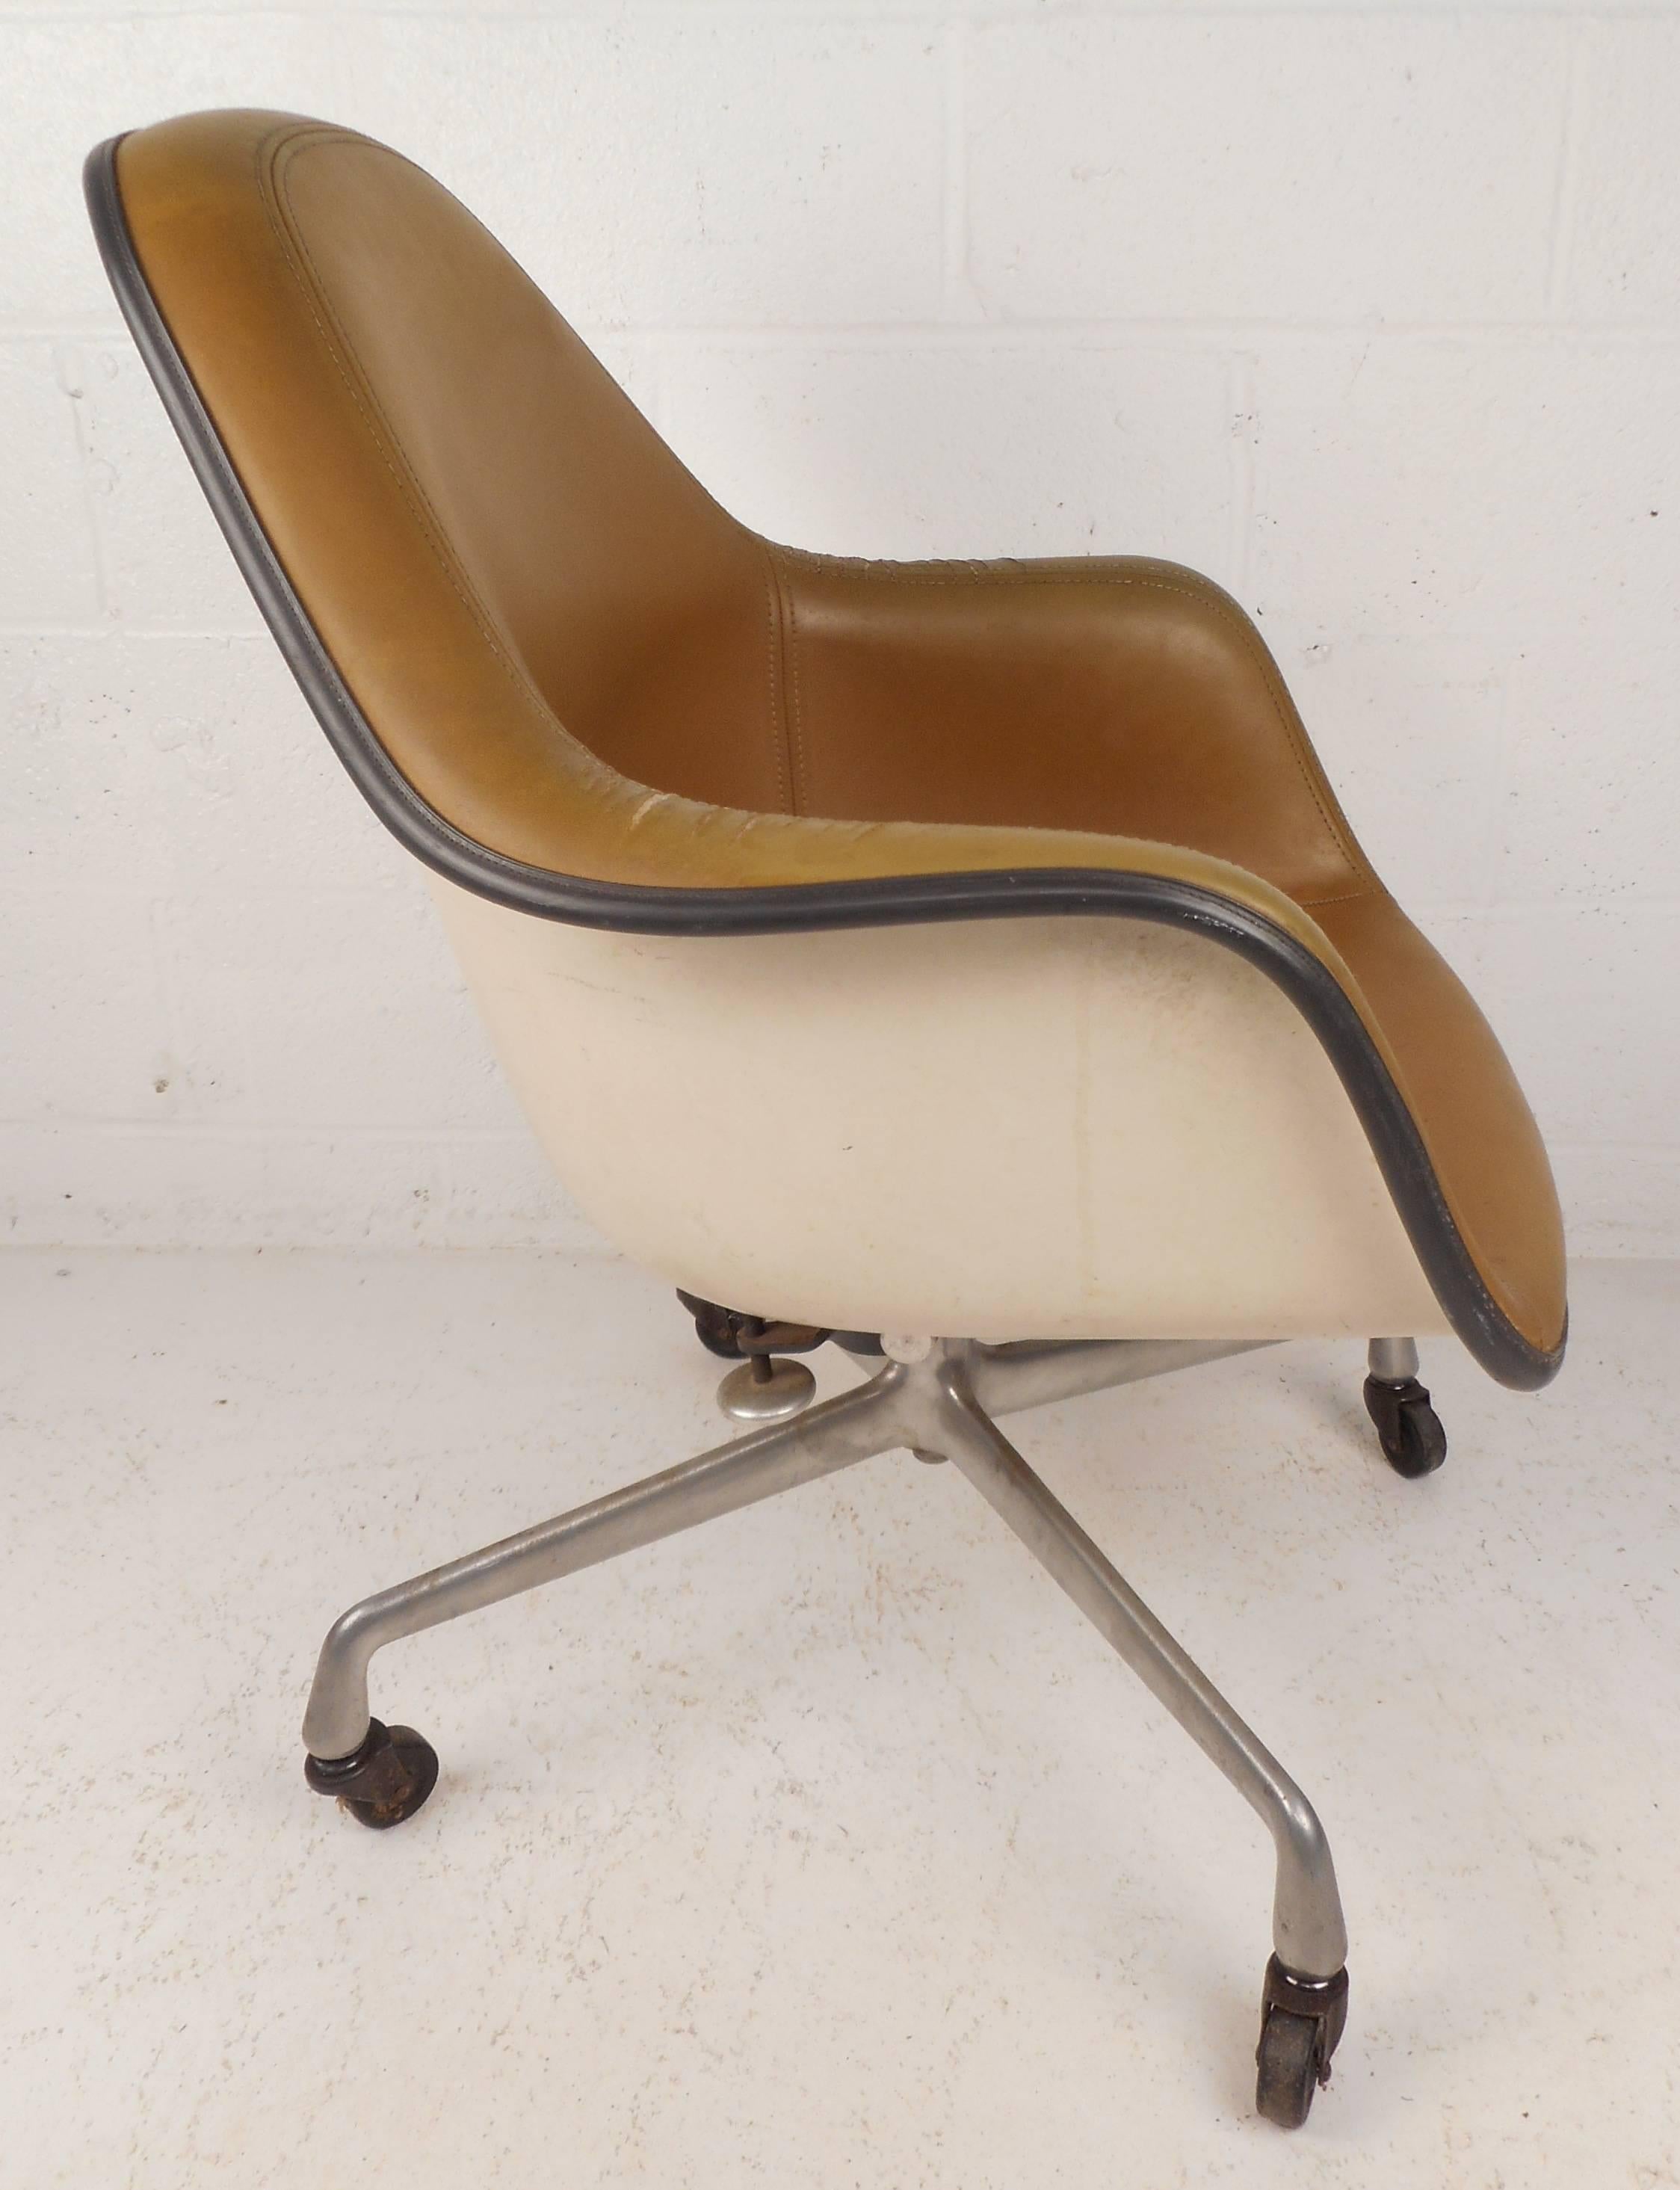 Beautiful vintage modern desk chair by Herman Miller features iconic strand fiberglass shell design with stitched vinyl upholstery. Stylish office chair has a chrome base with wheels ensuring comfort and convenience. Original stamp on bottom reads,